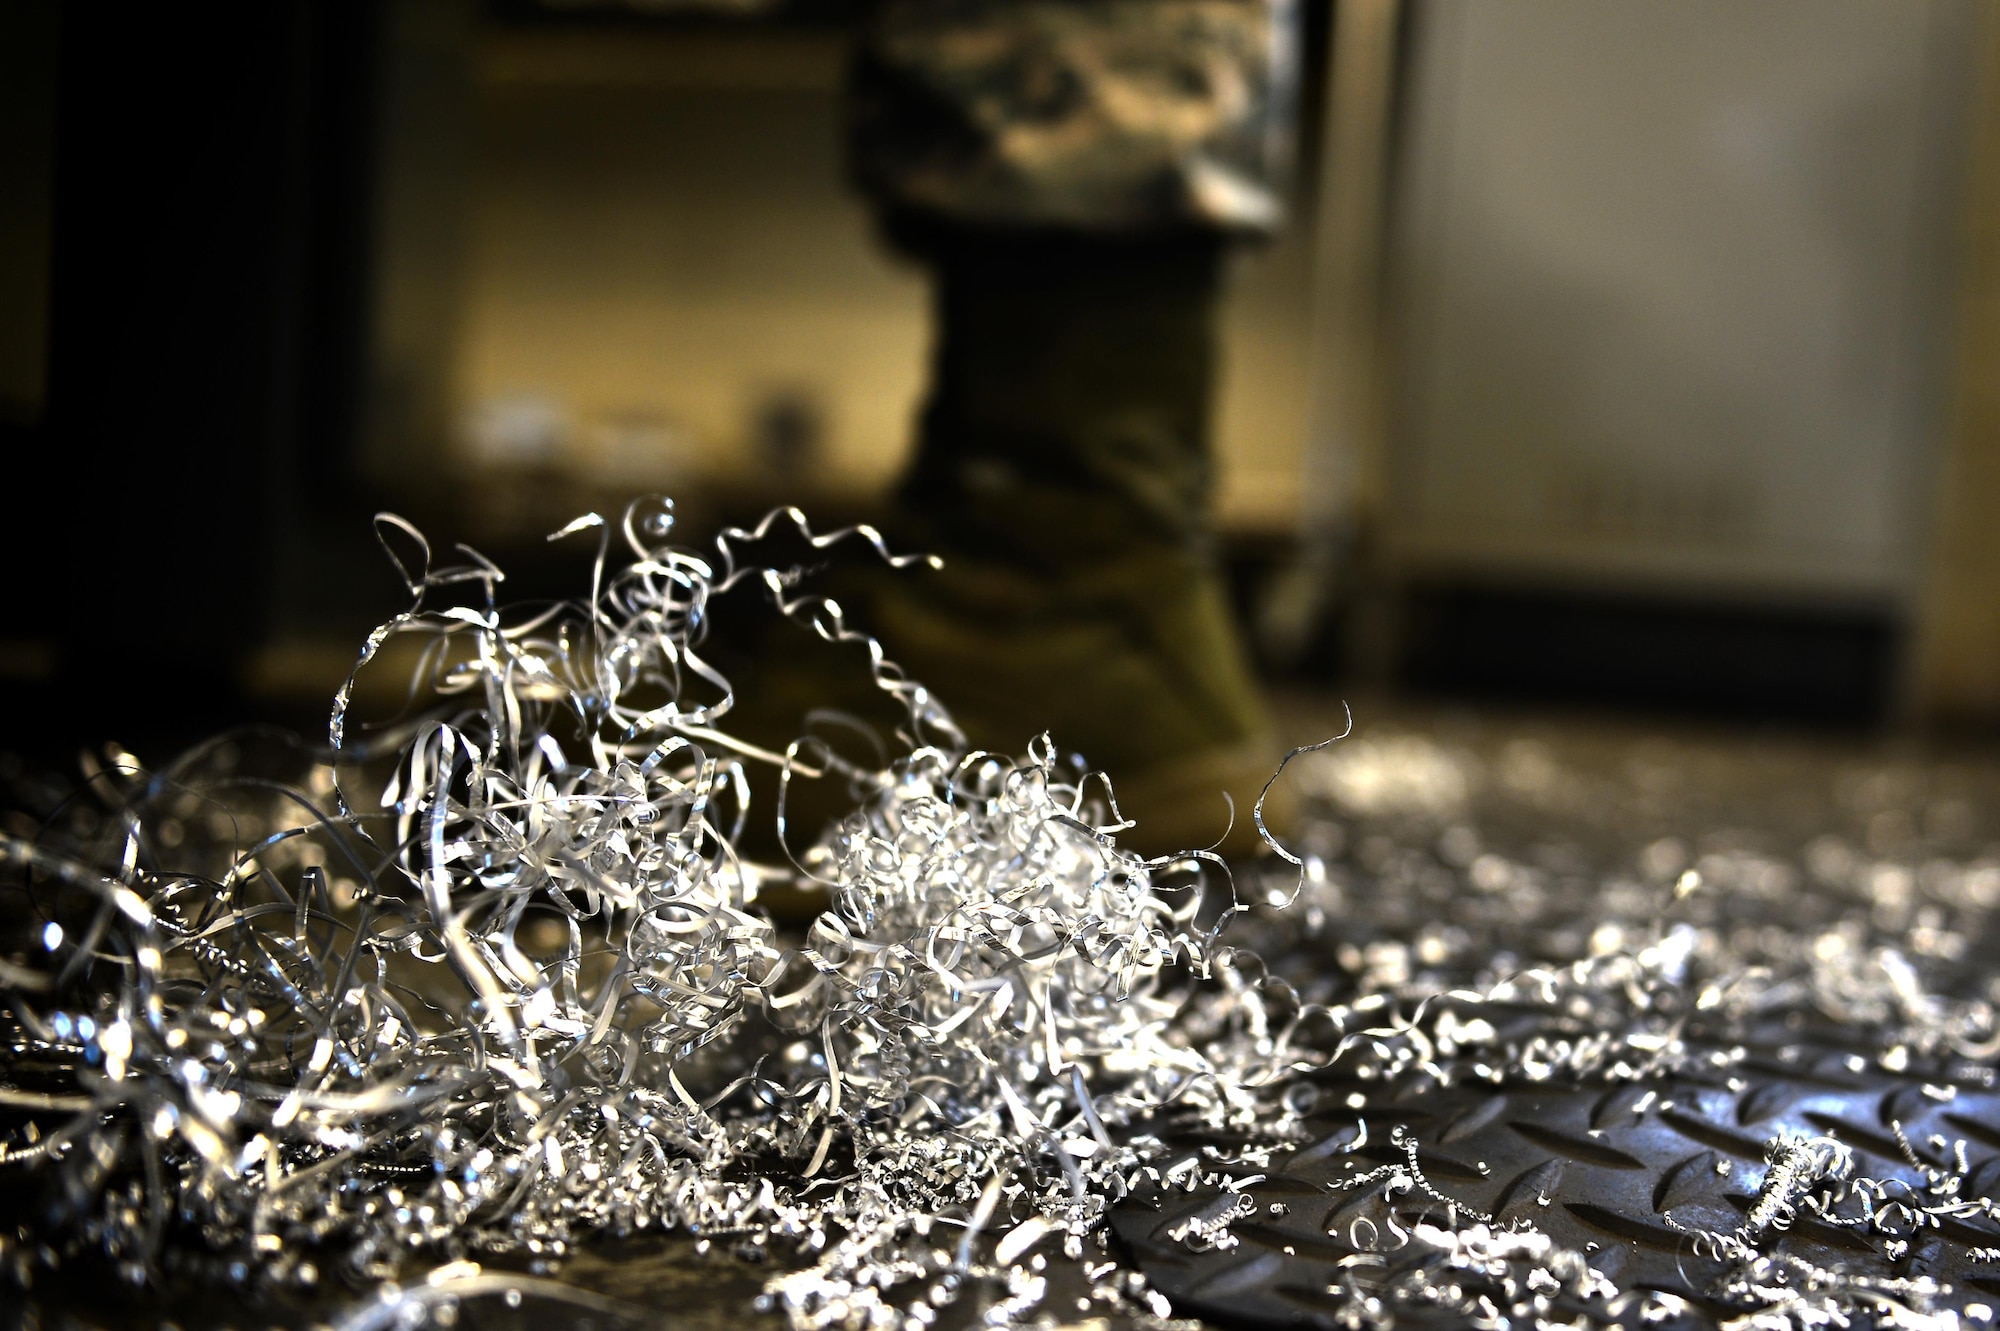 U.S. Air Force Airman 1st Class Mason Carny, 20th Equipment Maintenance Squadron aircraft metals technology technician, stands amongst metal shavings at Shaw Air Force Base, S.C., Jan. 31, 2017. Airmen assigned to the 20th EMS metals technology lab perform maintenance on various pieces of equipment around base ranging from F-16CM Fighting Falcon parts to munition accessories. (U.S. Air Force photo by Airman 1st Class Christopher Maldonado)